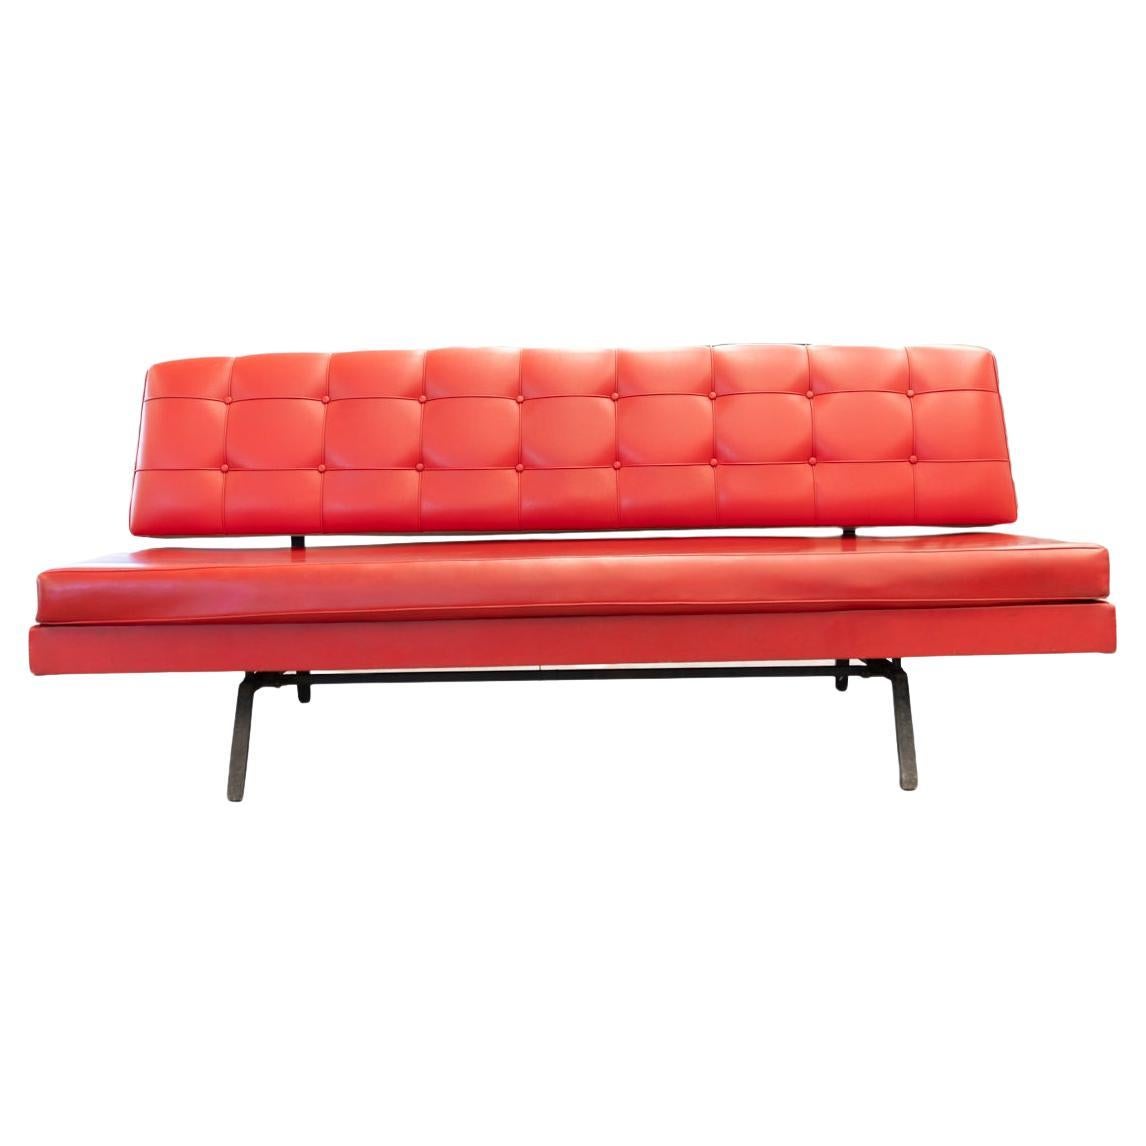 70s red sofa